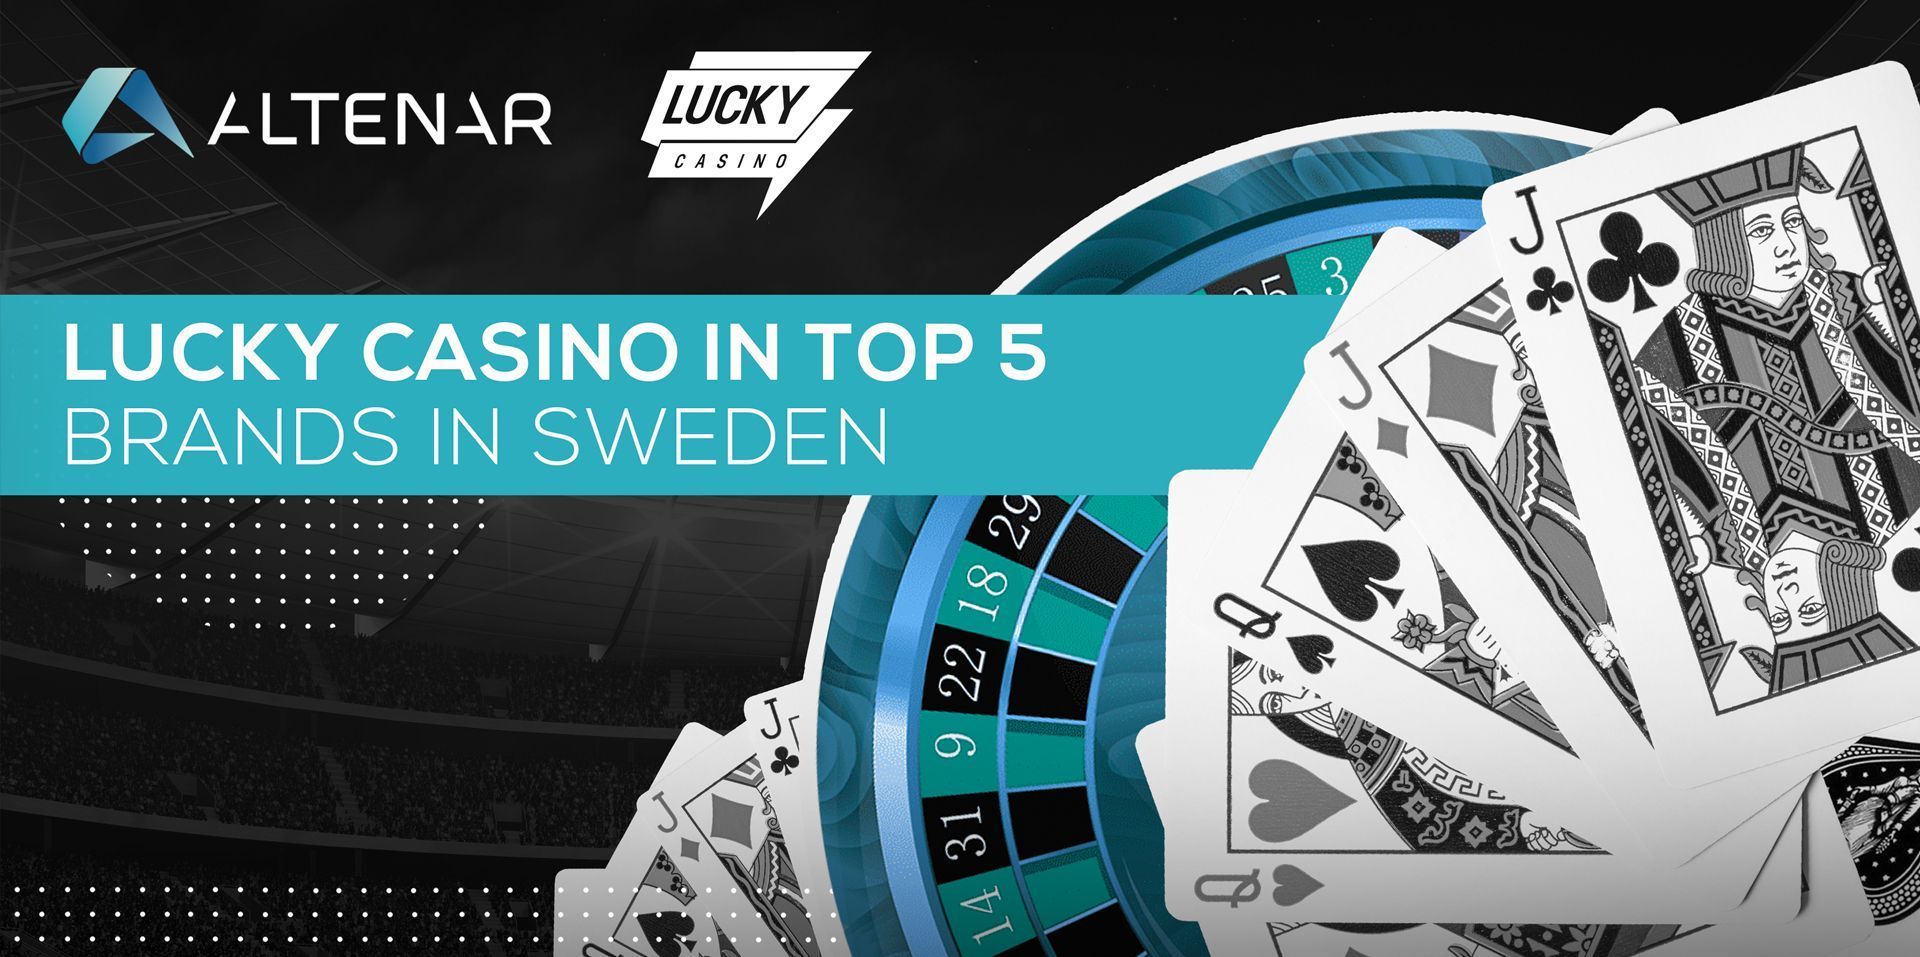 Altenar's clients, Lucky Casino, were named in the Top 5 performing online gambling Brands In Sweden through NGR.2